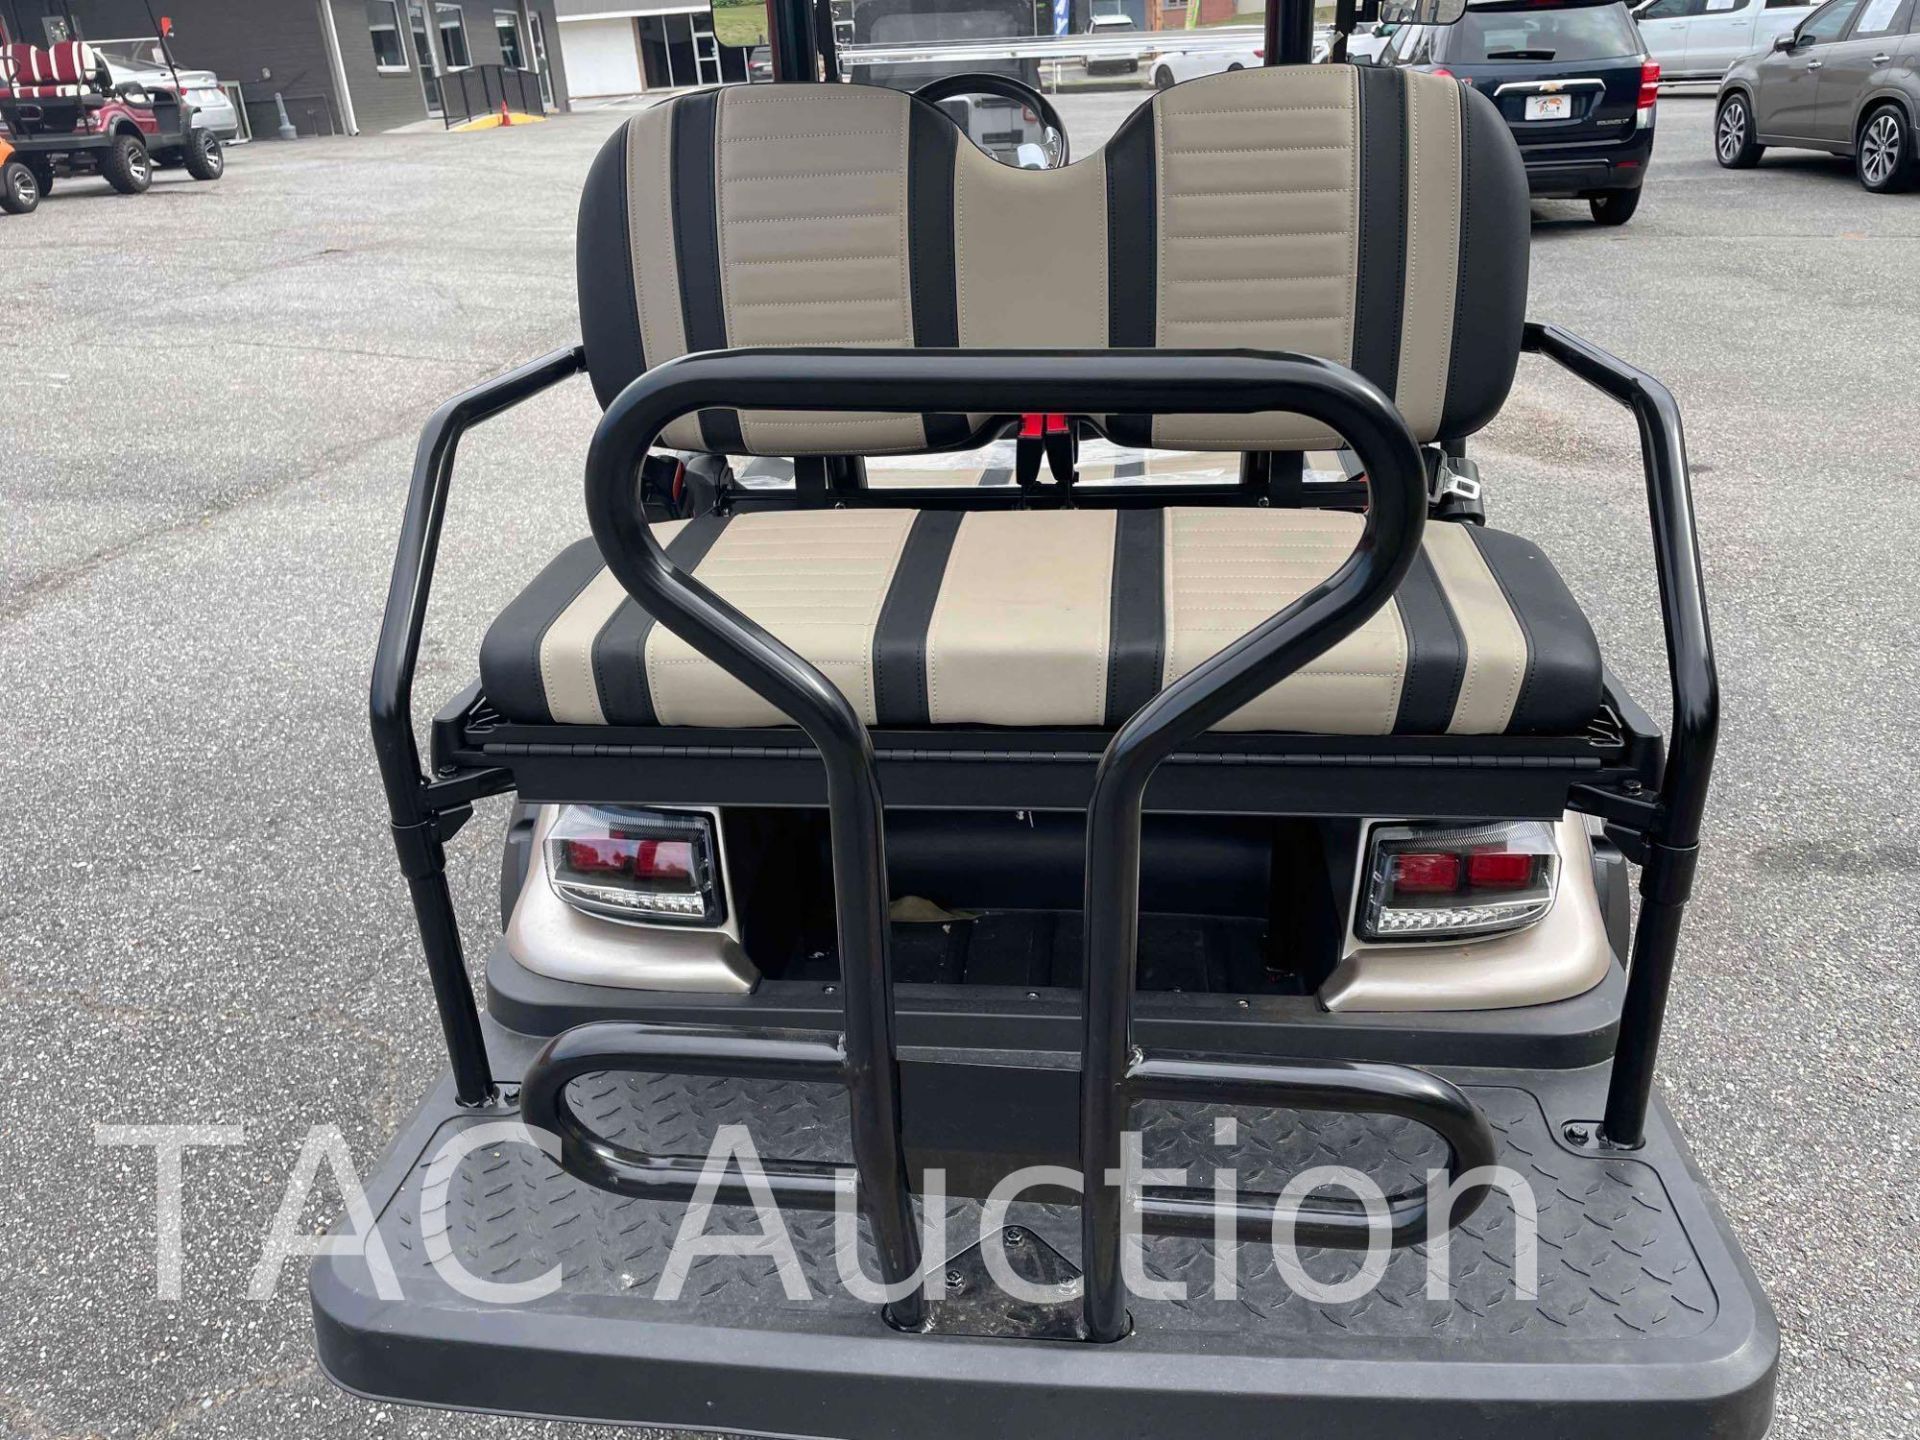 New 2023 ICON i40L Electric Golf Cart W/ Charger - Image 9 of 25